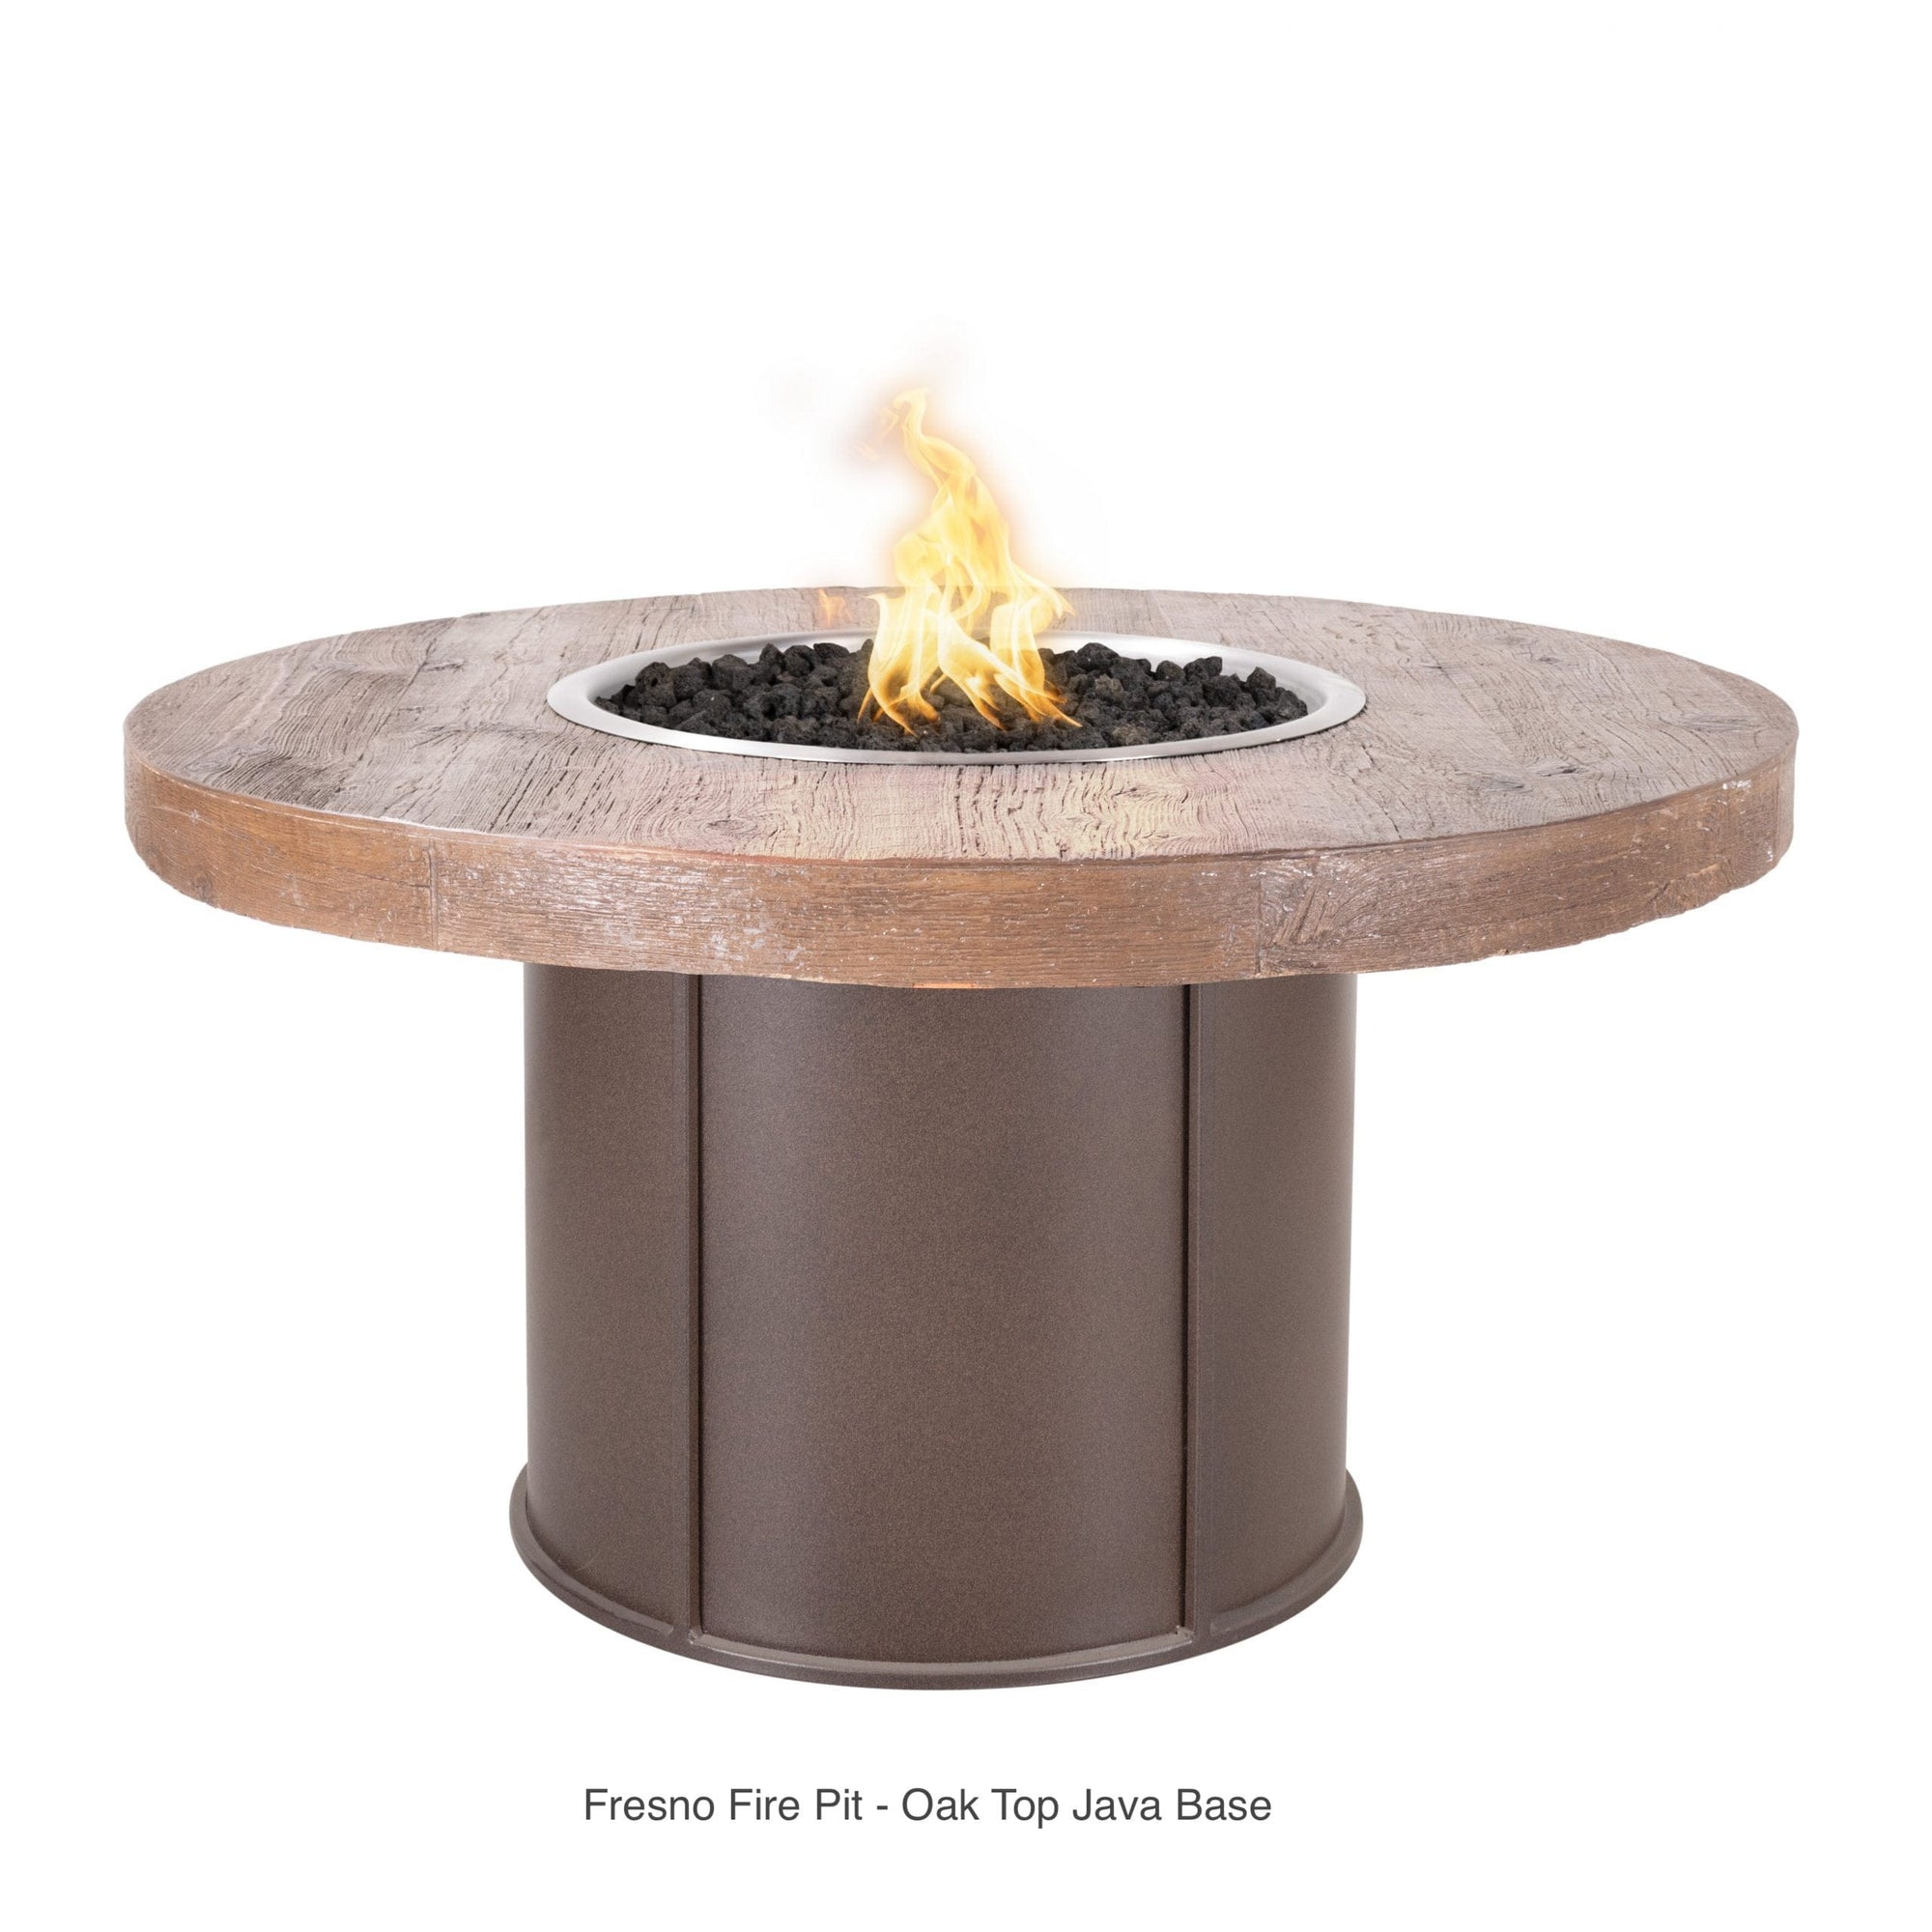 The Outdoor Plus Fire Features The Outdoor Plus 43", 60" Fresno Wood Grain and Steel Fire Pit / OPT-FRS43, OPT-FRS60